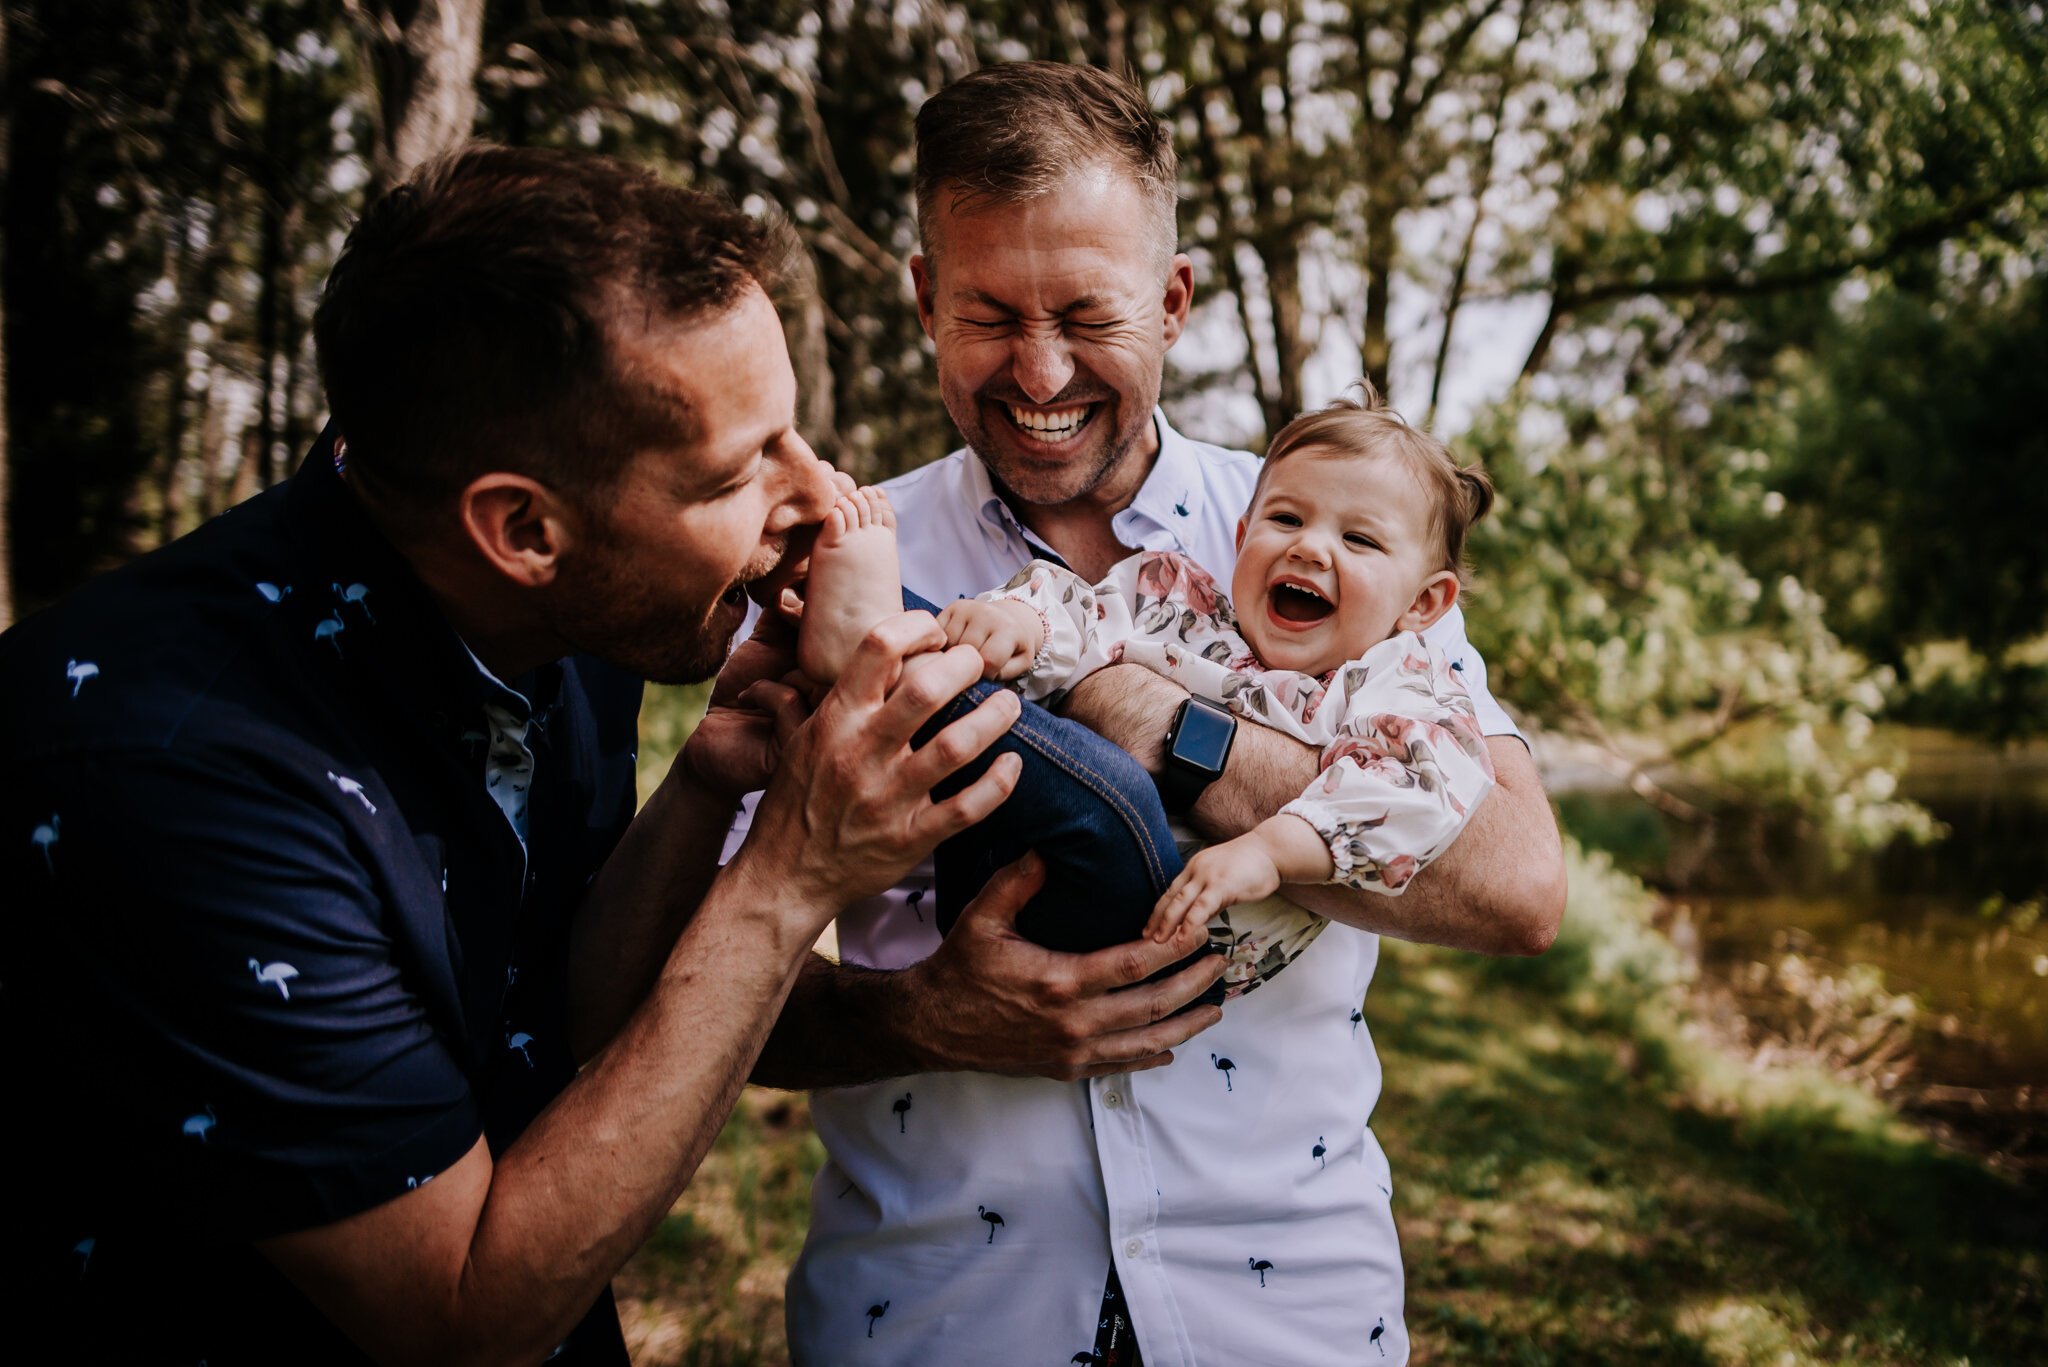 Paul+and+Dave+Gay+Couple+Family+Session+Colorado+Springs+Colorado+LGBTQ+Dads+Daughter+Wild+Prairie+Photography-18-2020.jpeg